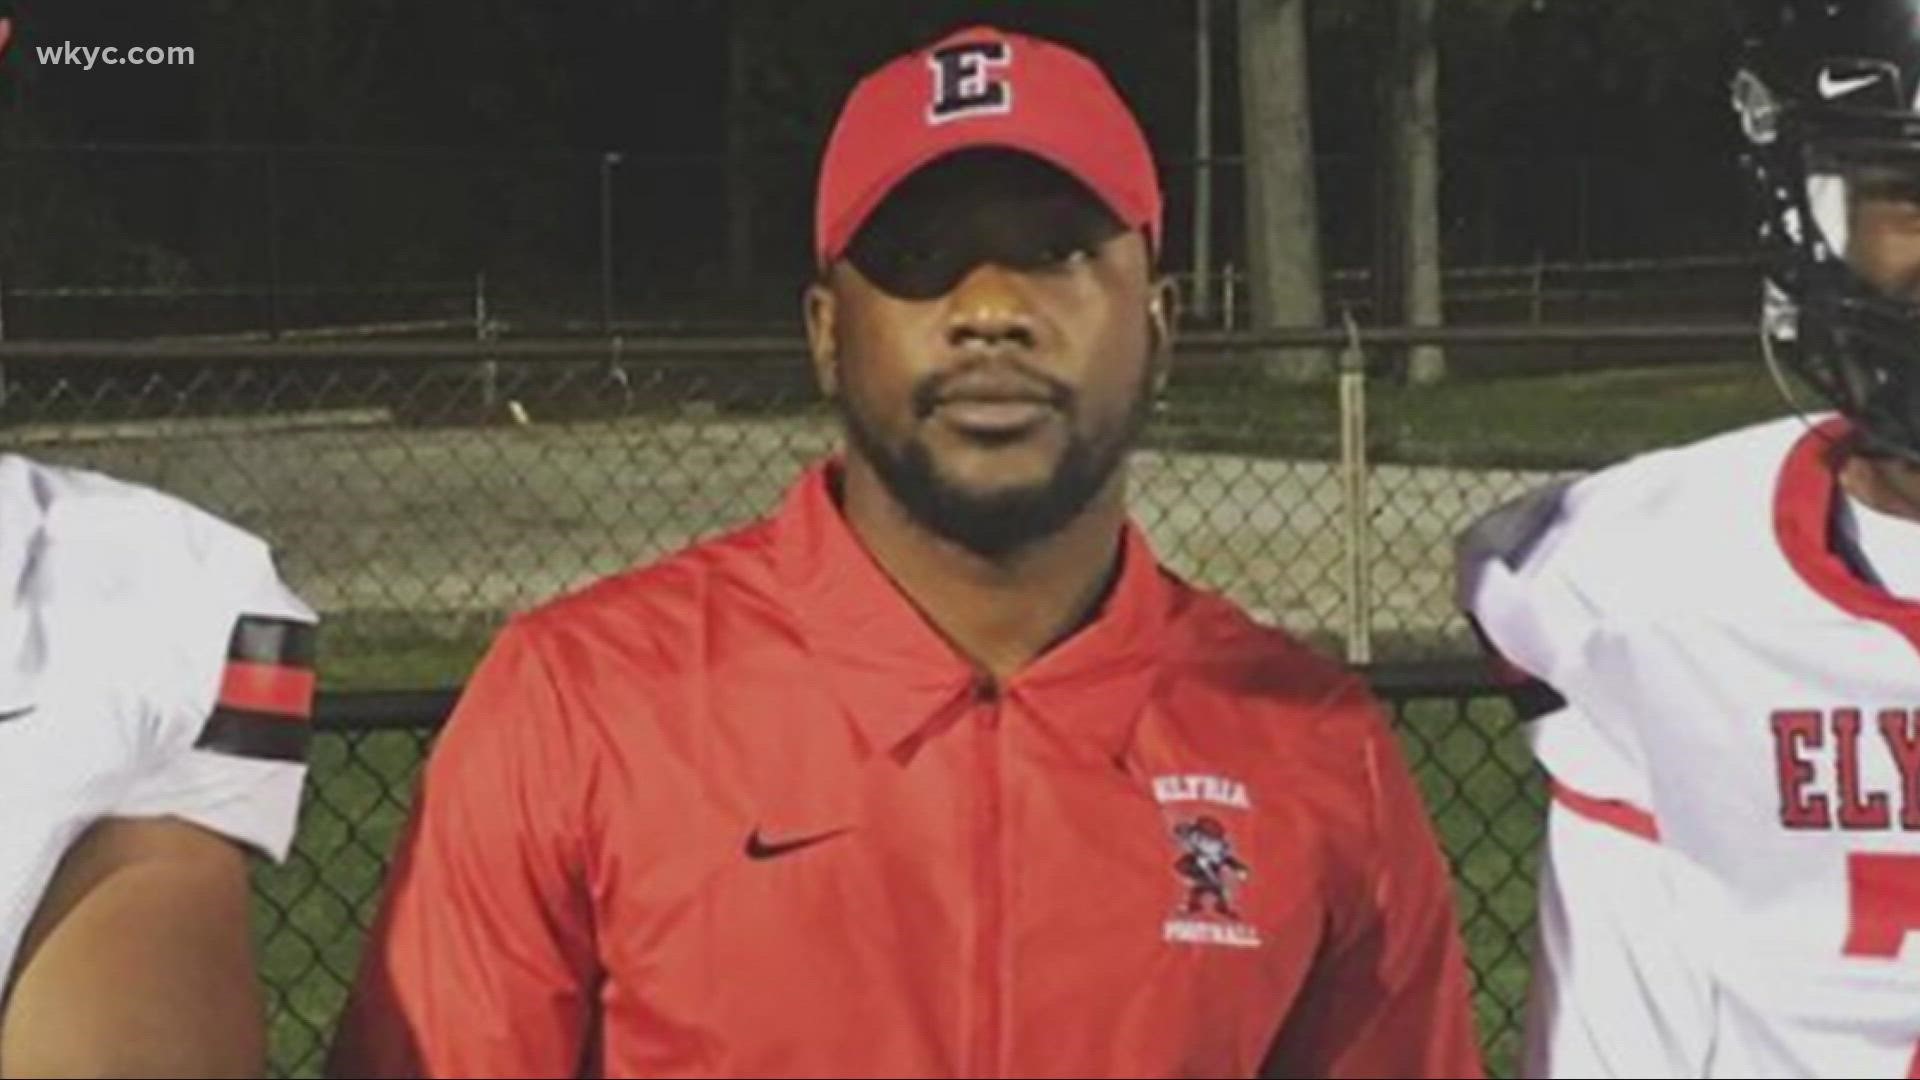 The Elyria City School District, where Bogard worked as an assistant coach, confirmed his death to 3News.